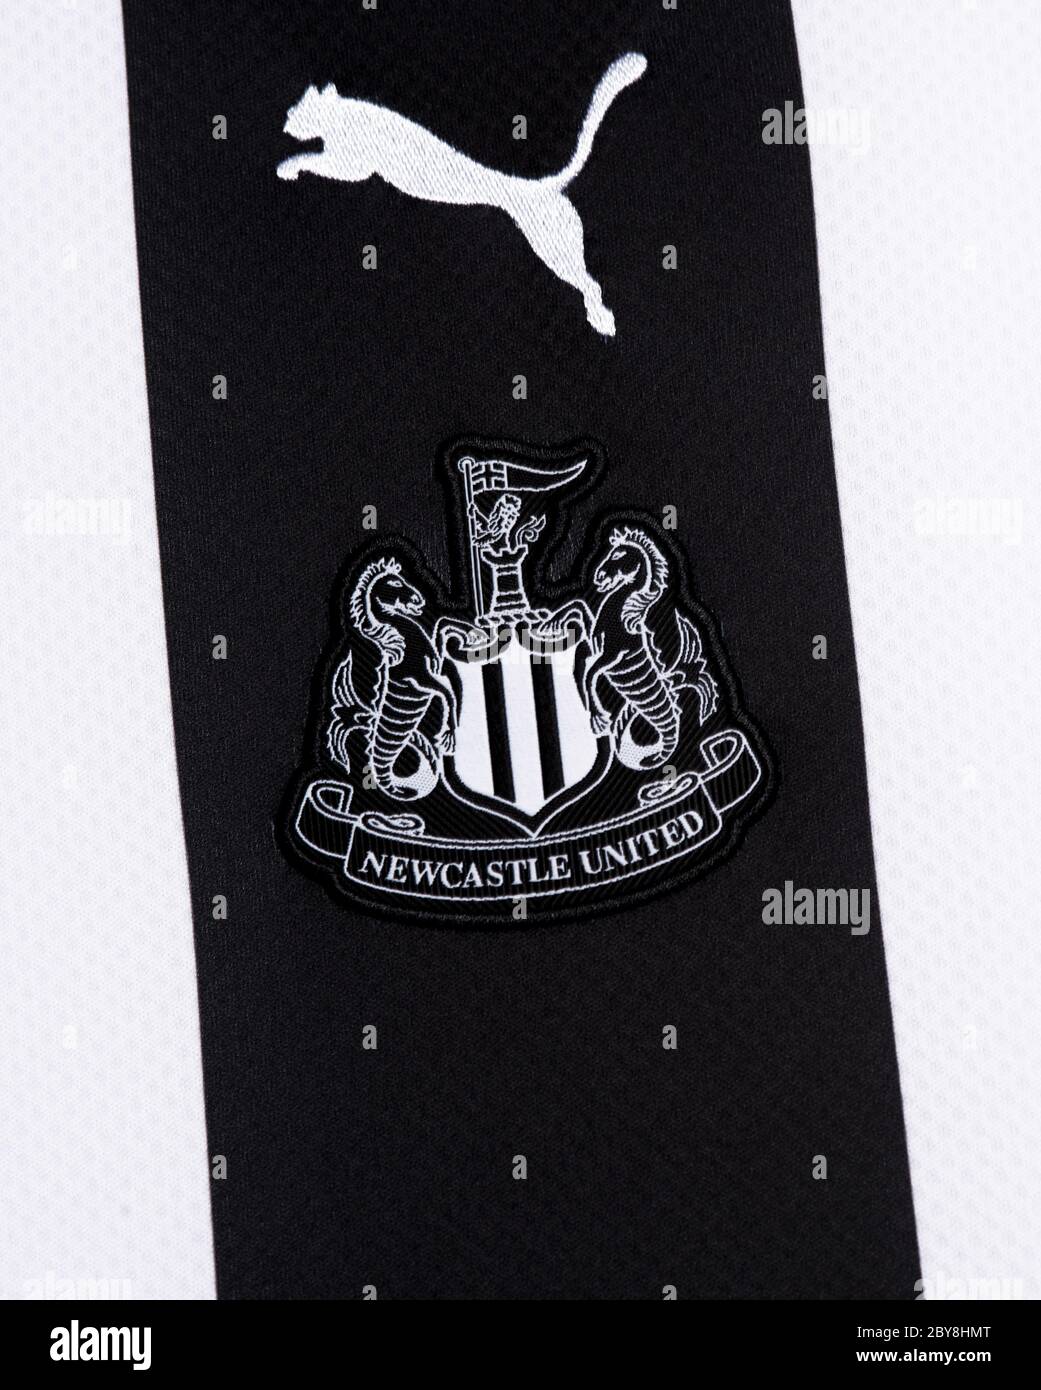 Newcastle United Football Club Crest Metal Window Sign SQ with Free UK P&P